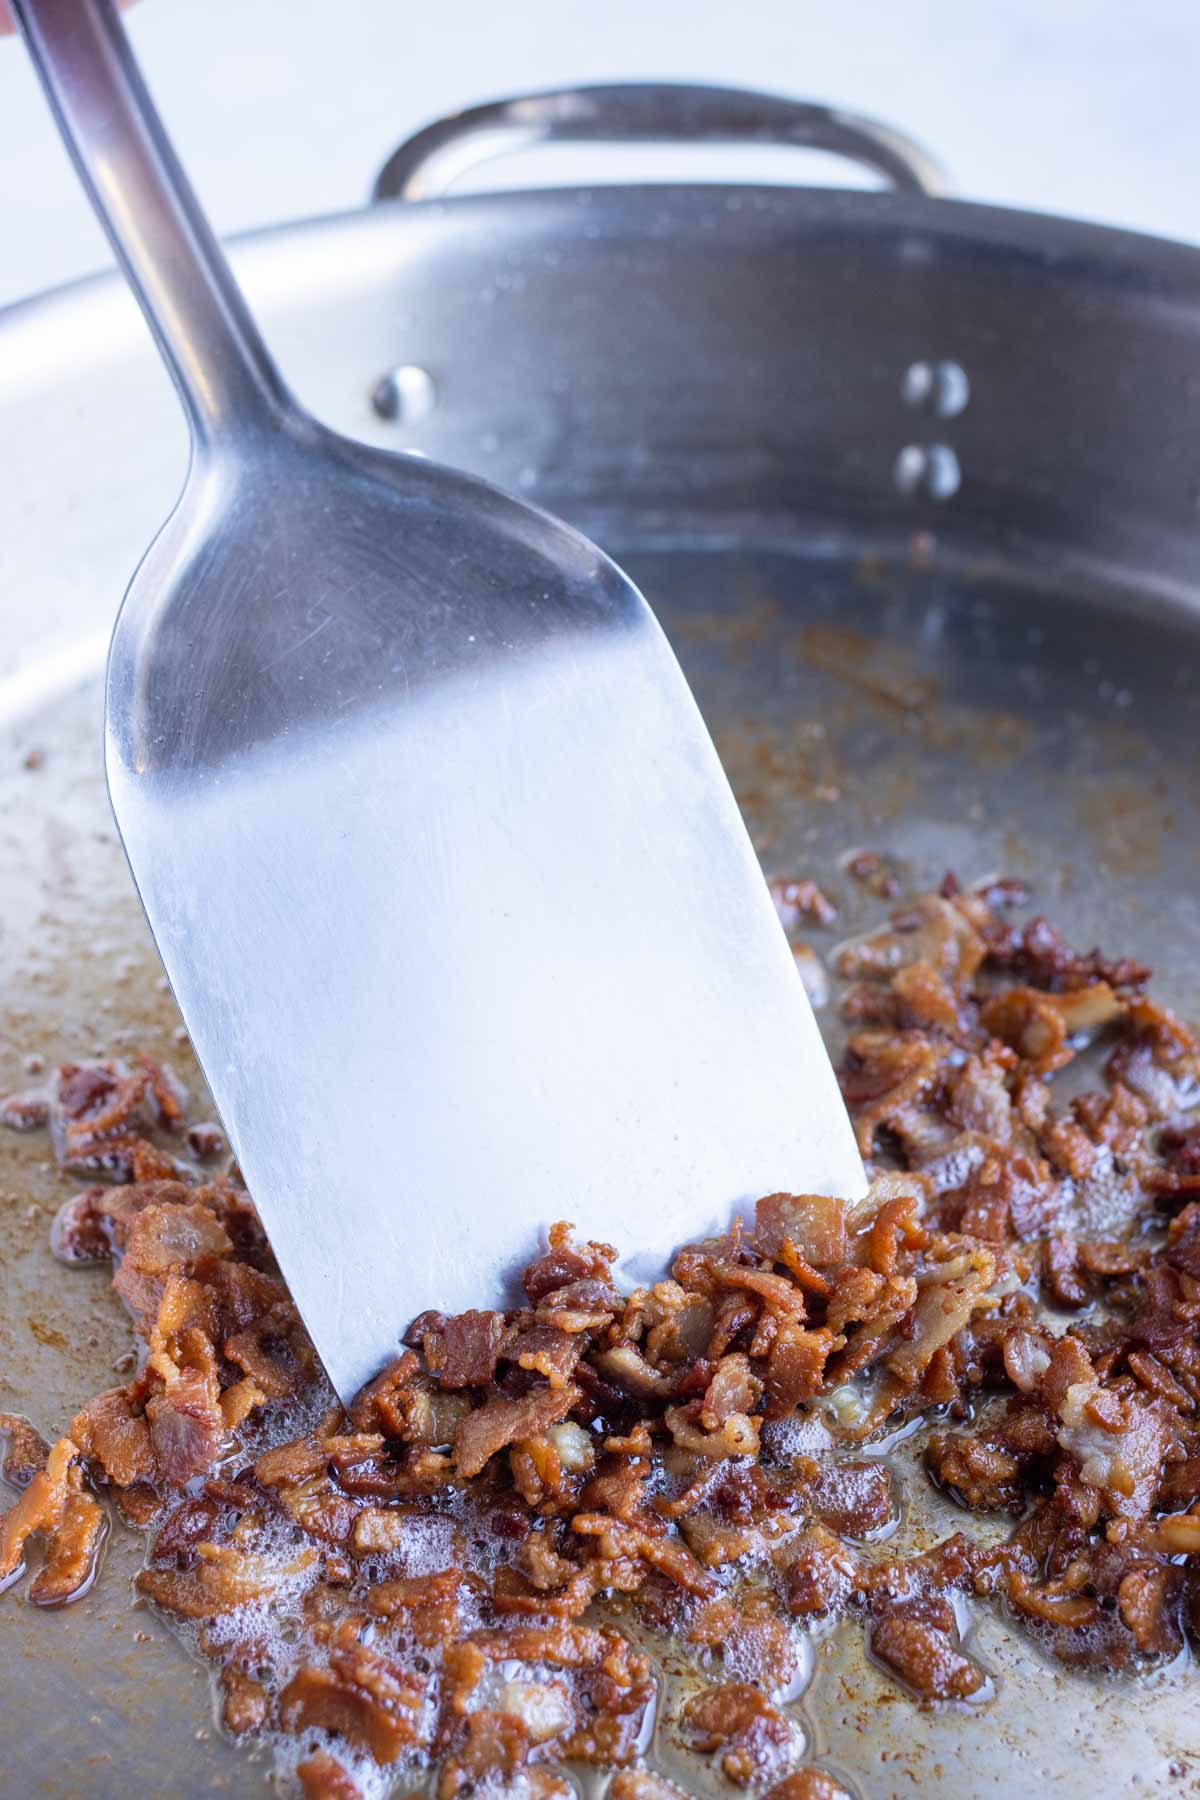 Bacon is cooked in a pan.